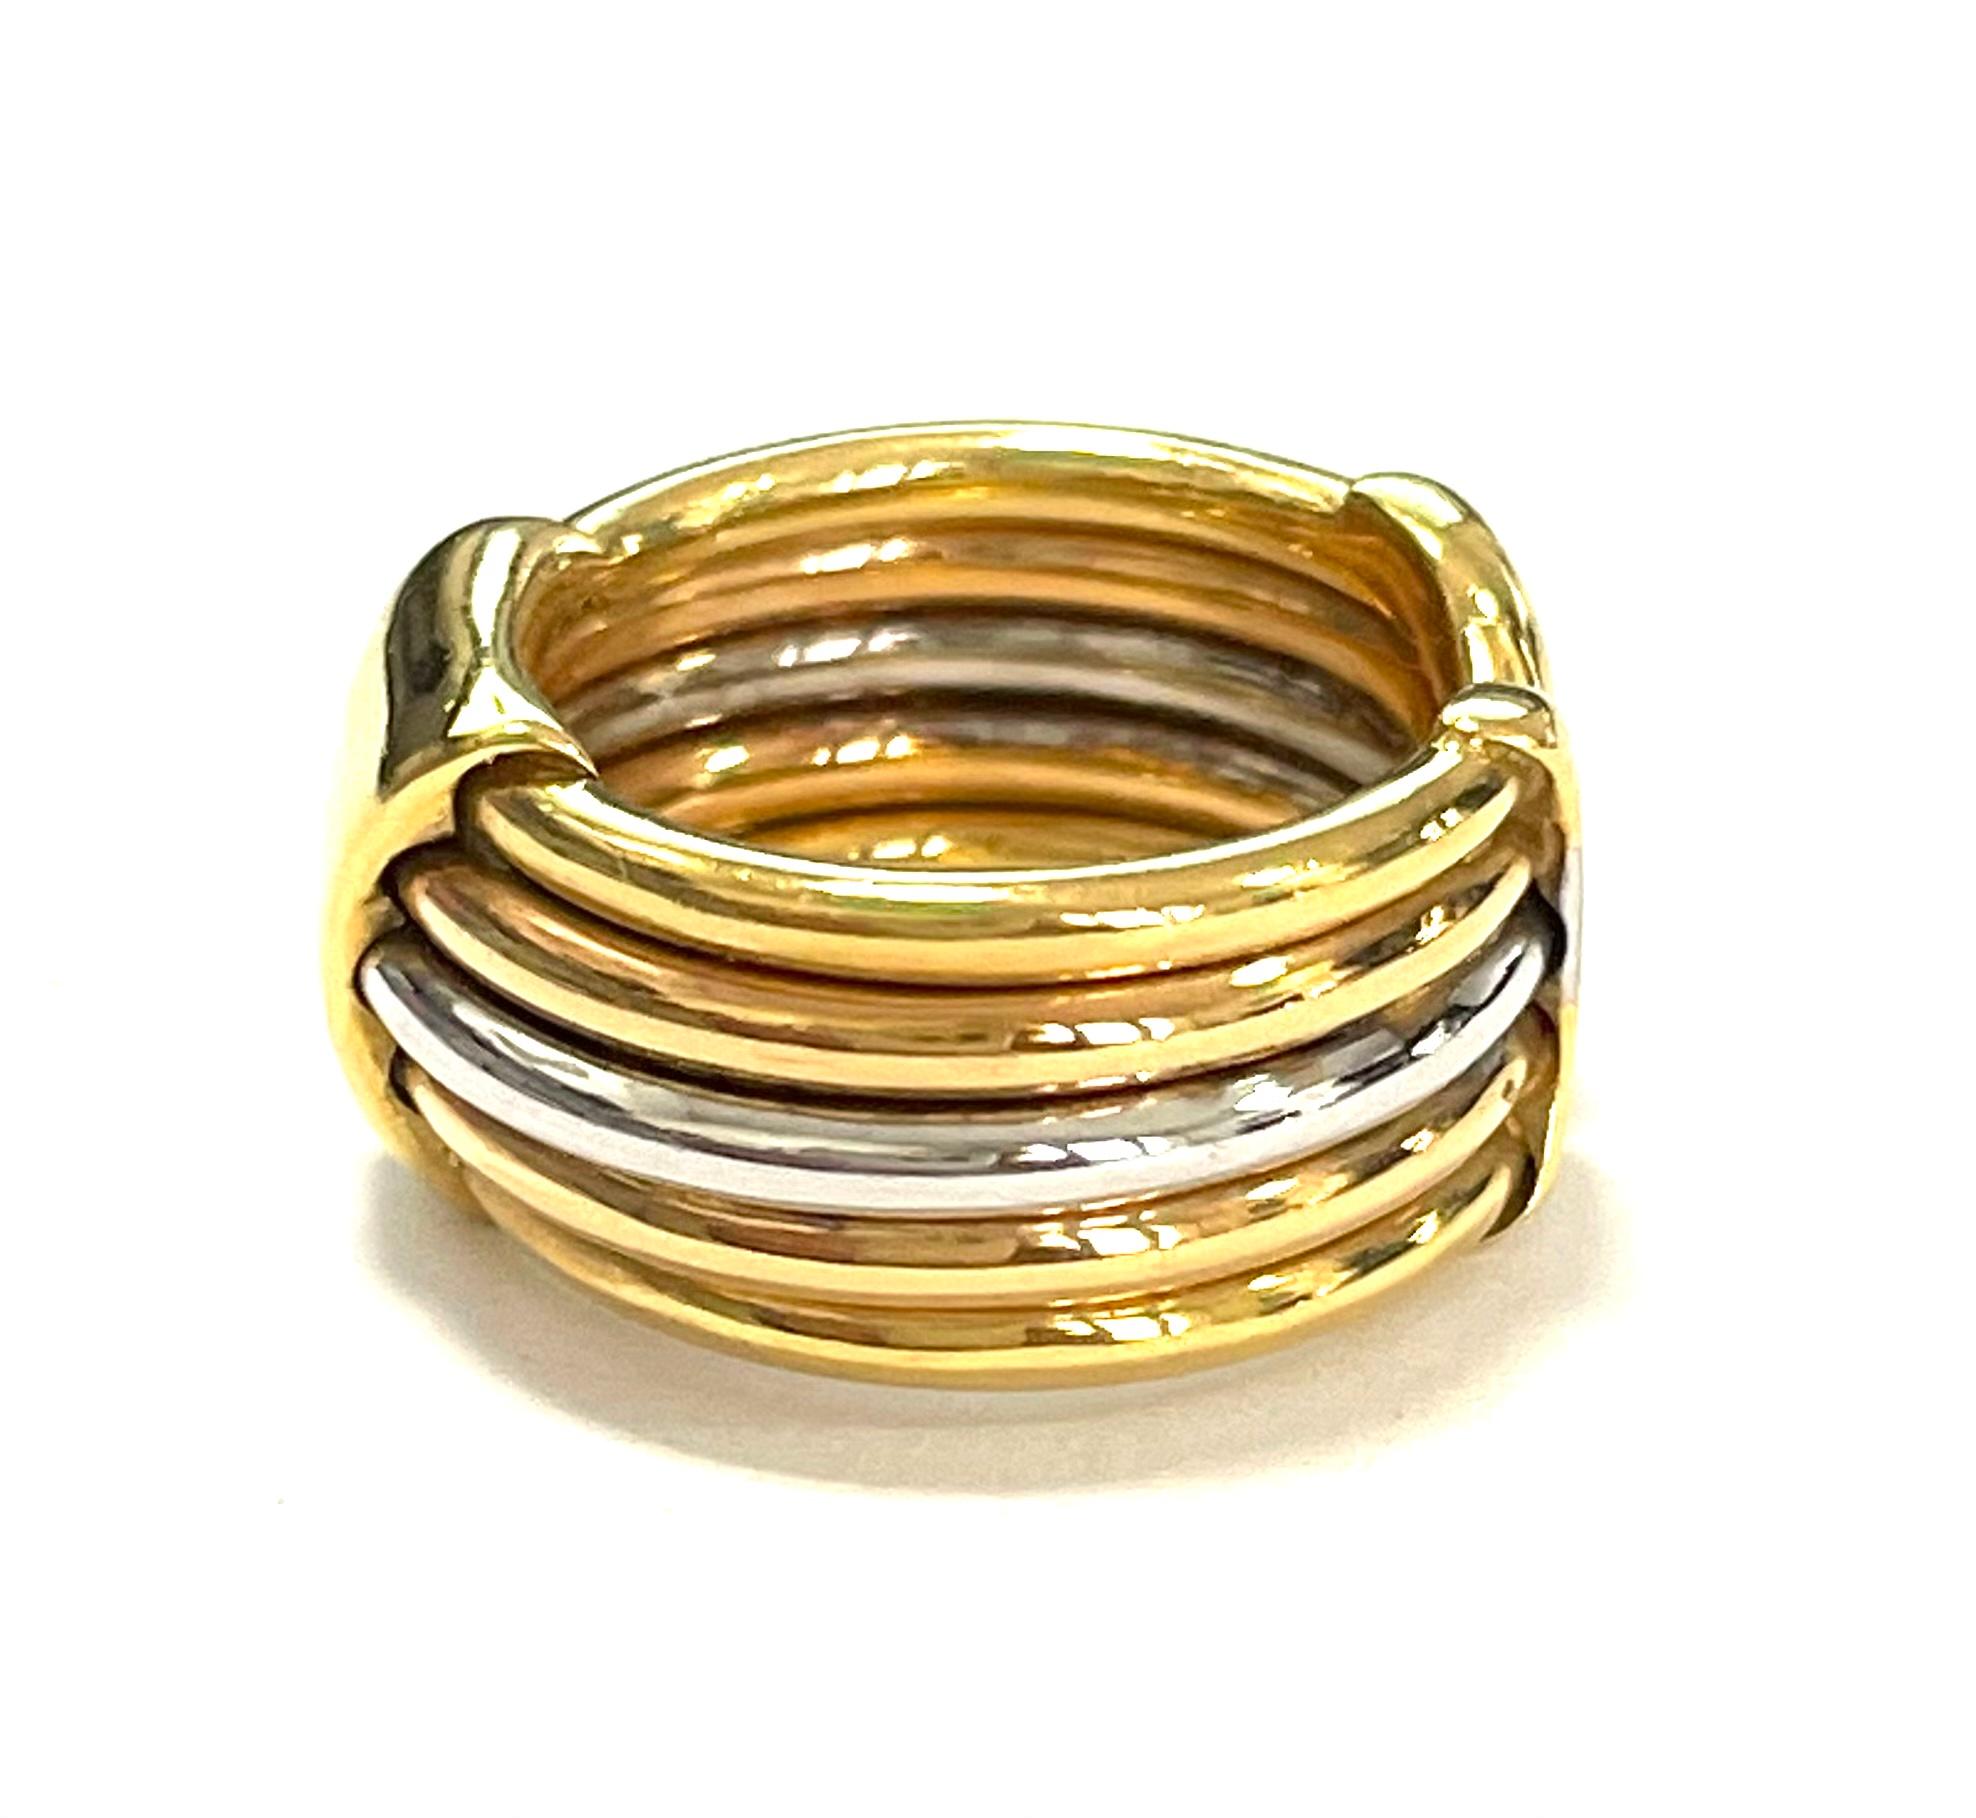 18k 3 colours bands ring 

The total weight of 18 kt Gold is GR 13.40
US Size 5
MARKS : 10MI 750 ITALY